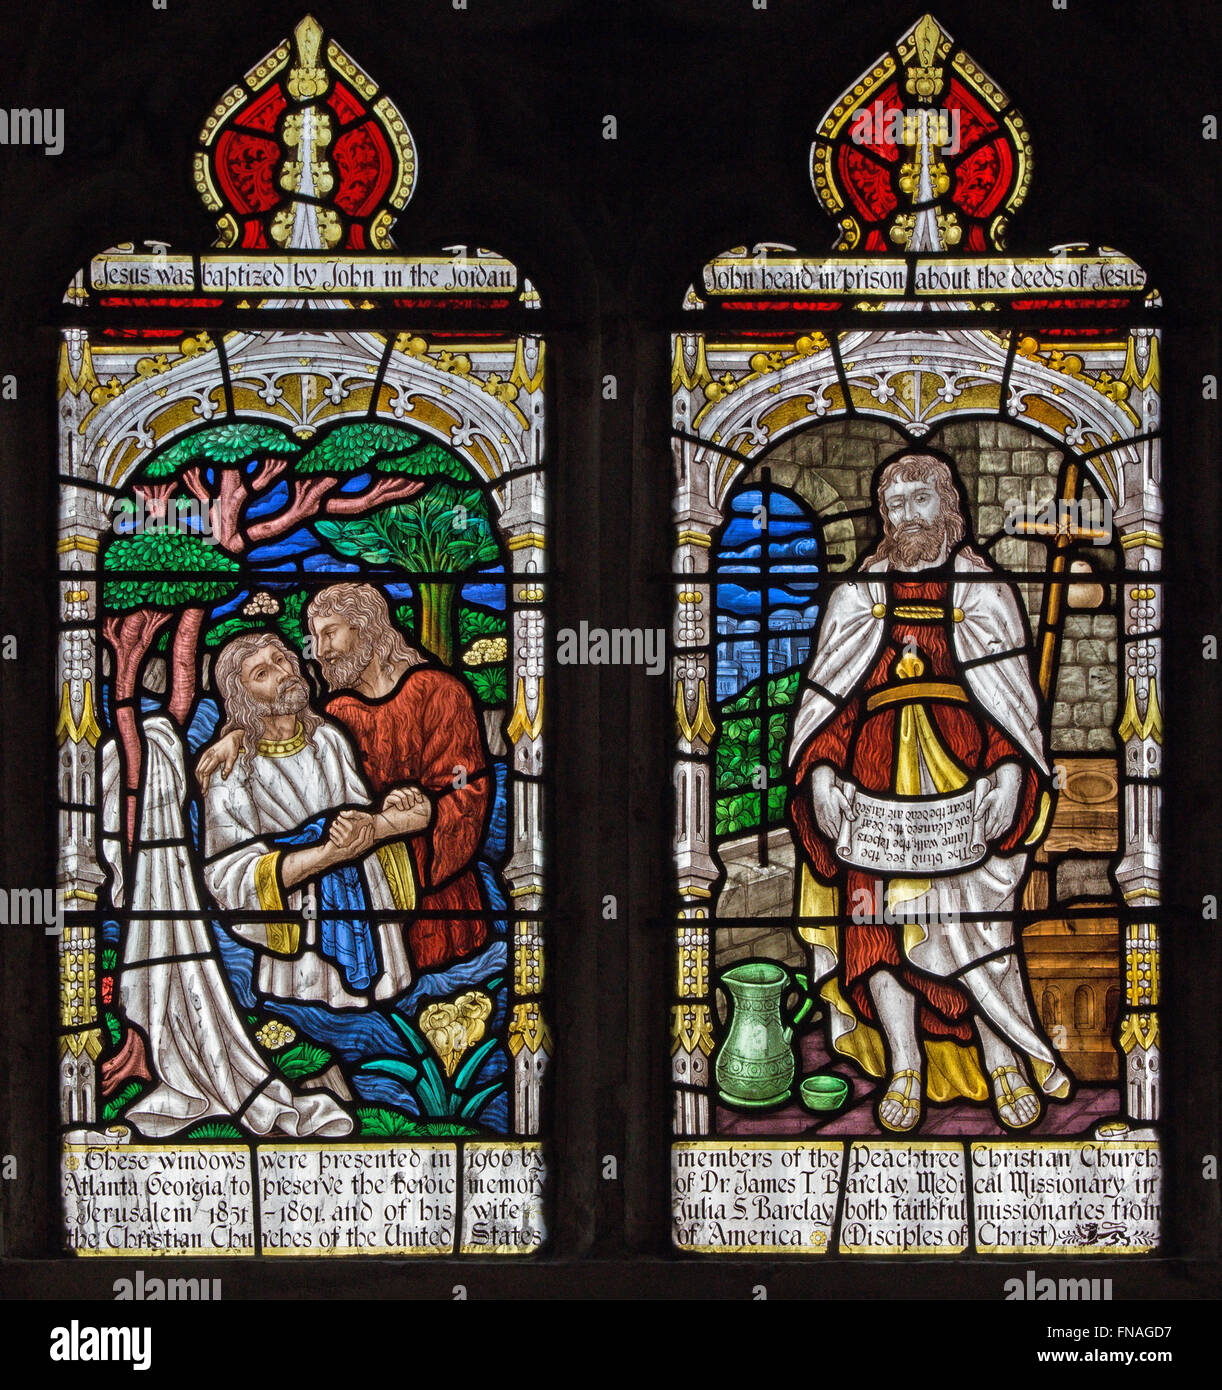 JERUSALEM, ISRAEL - MARCH 5, 2015: The baptism of Christ, and St. John the Baptist on the windowpane. Stock Photo